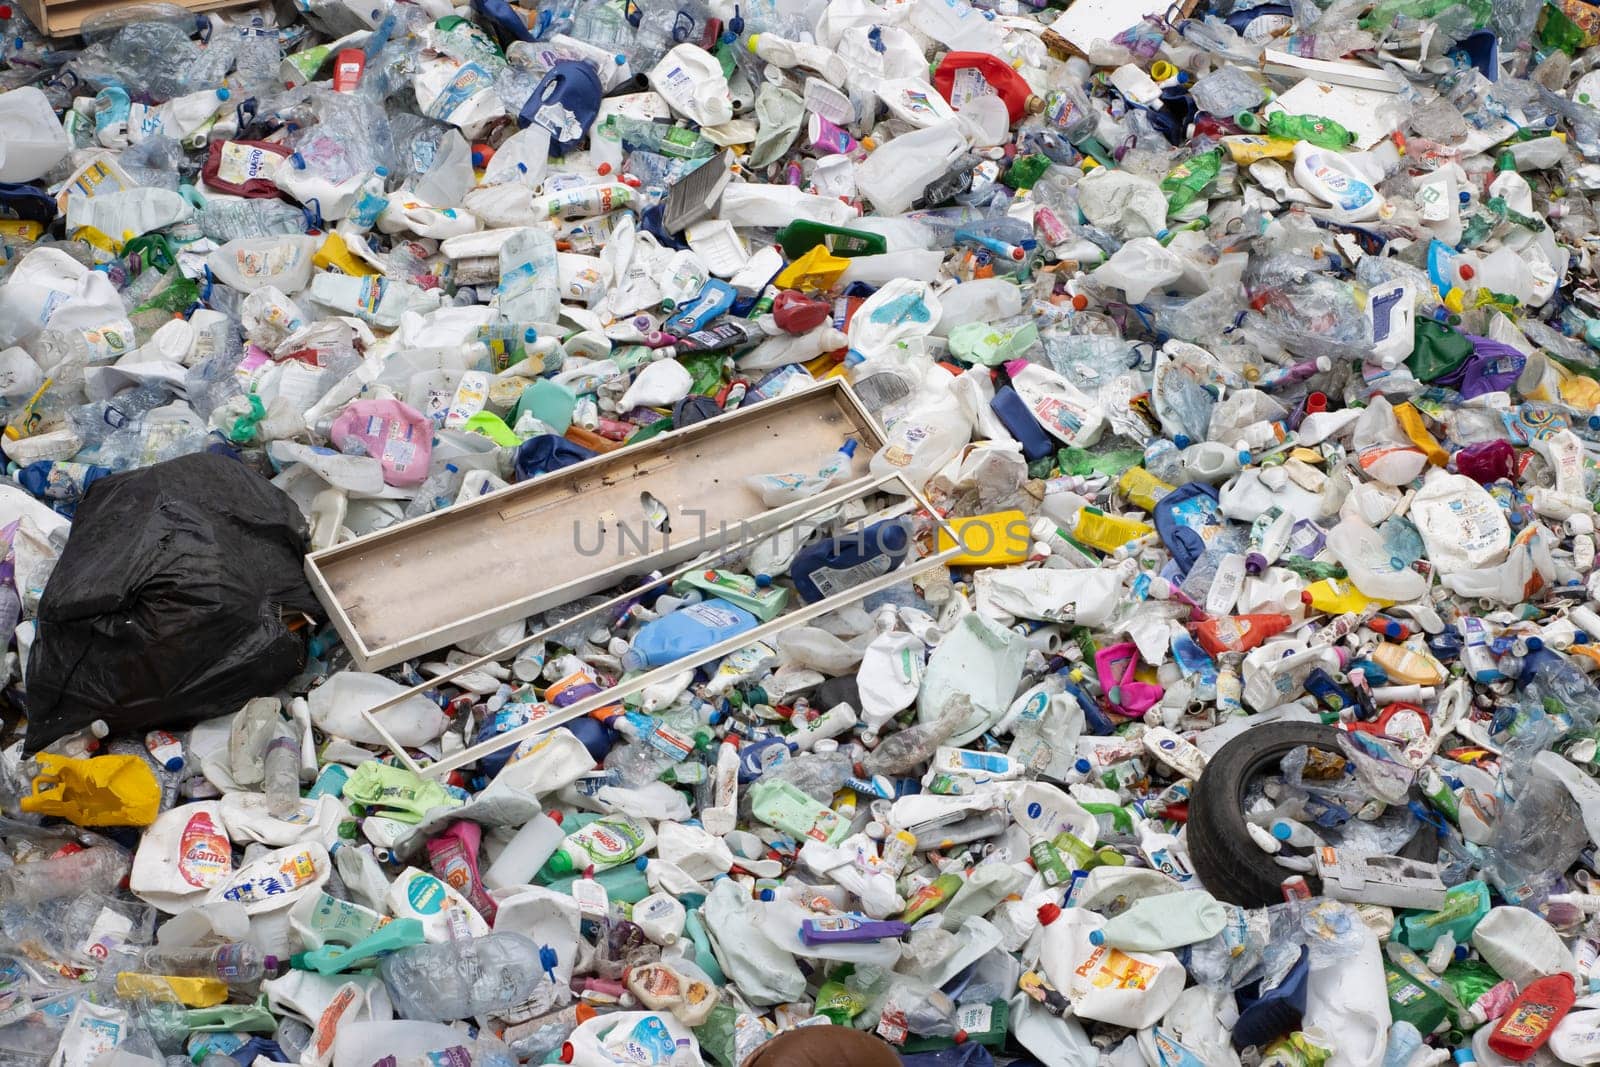 16 october 2022 Almada, Portugal: recyclable landfill full of plastic garbage by Studia72